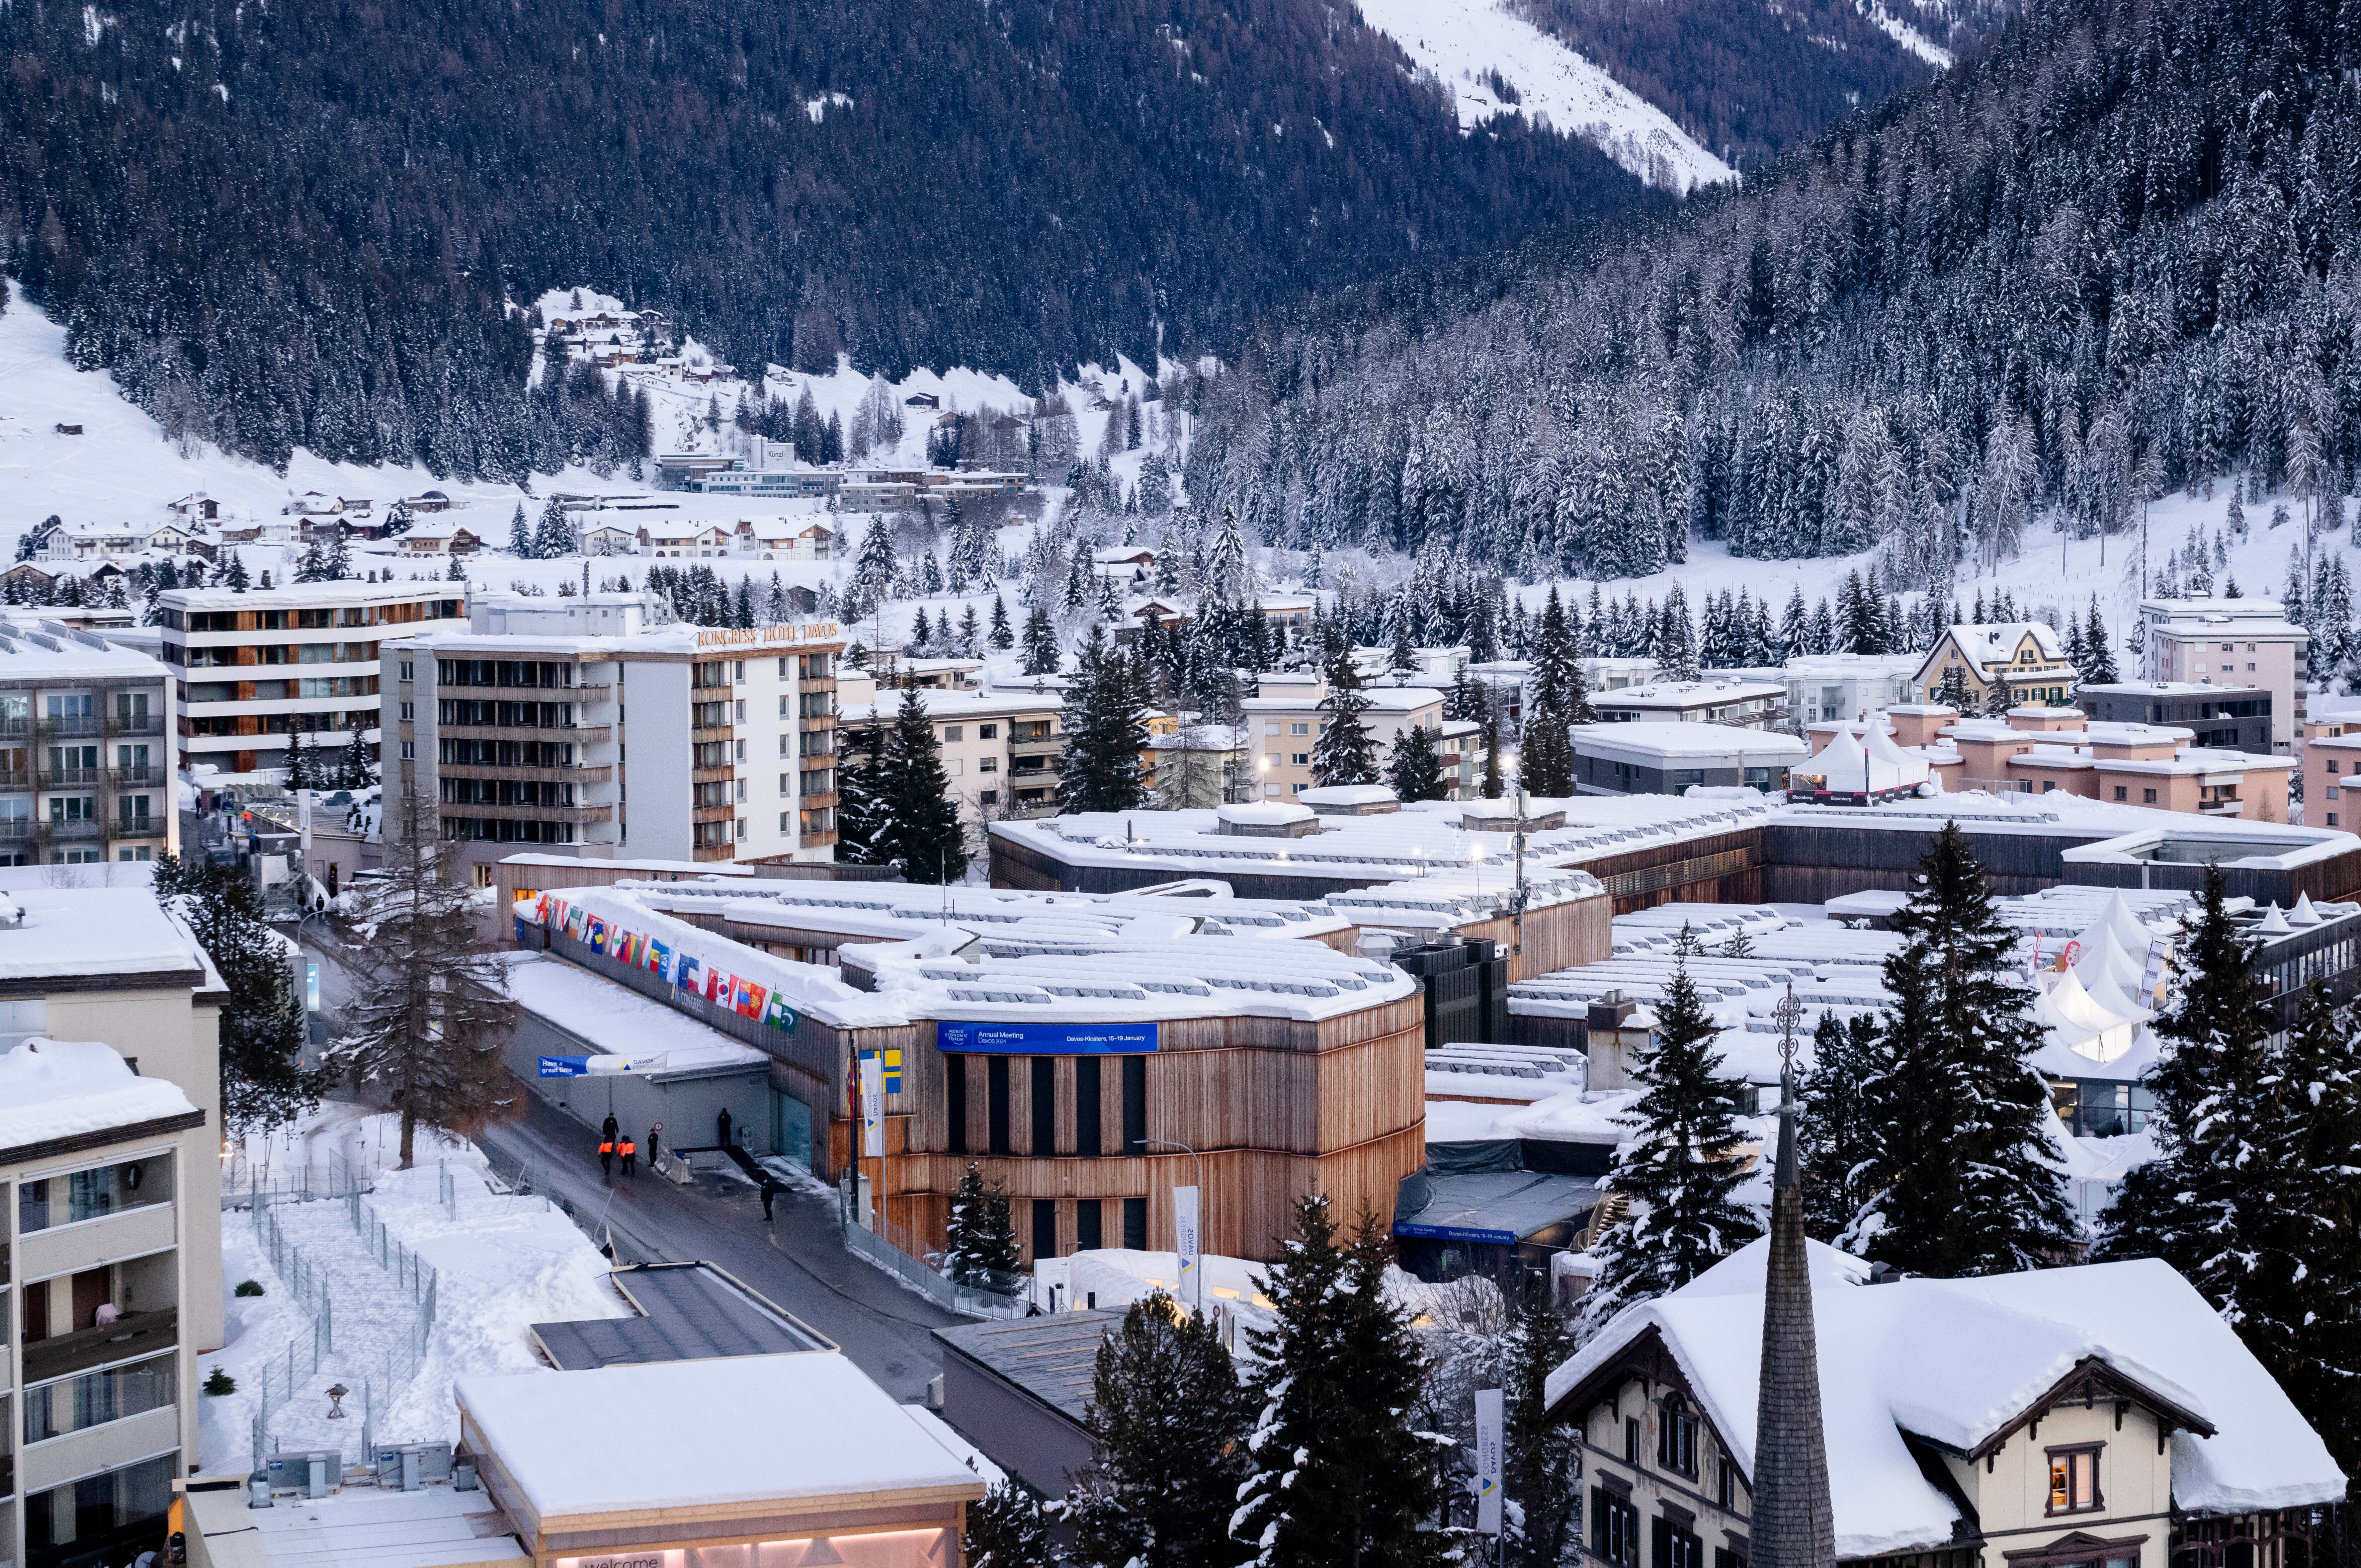 Icy reception: snow covers Davos as the global economy’s big players meet